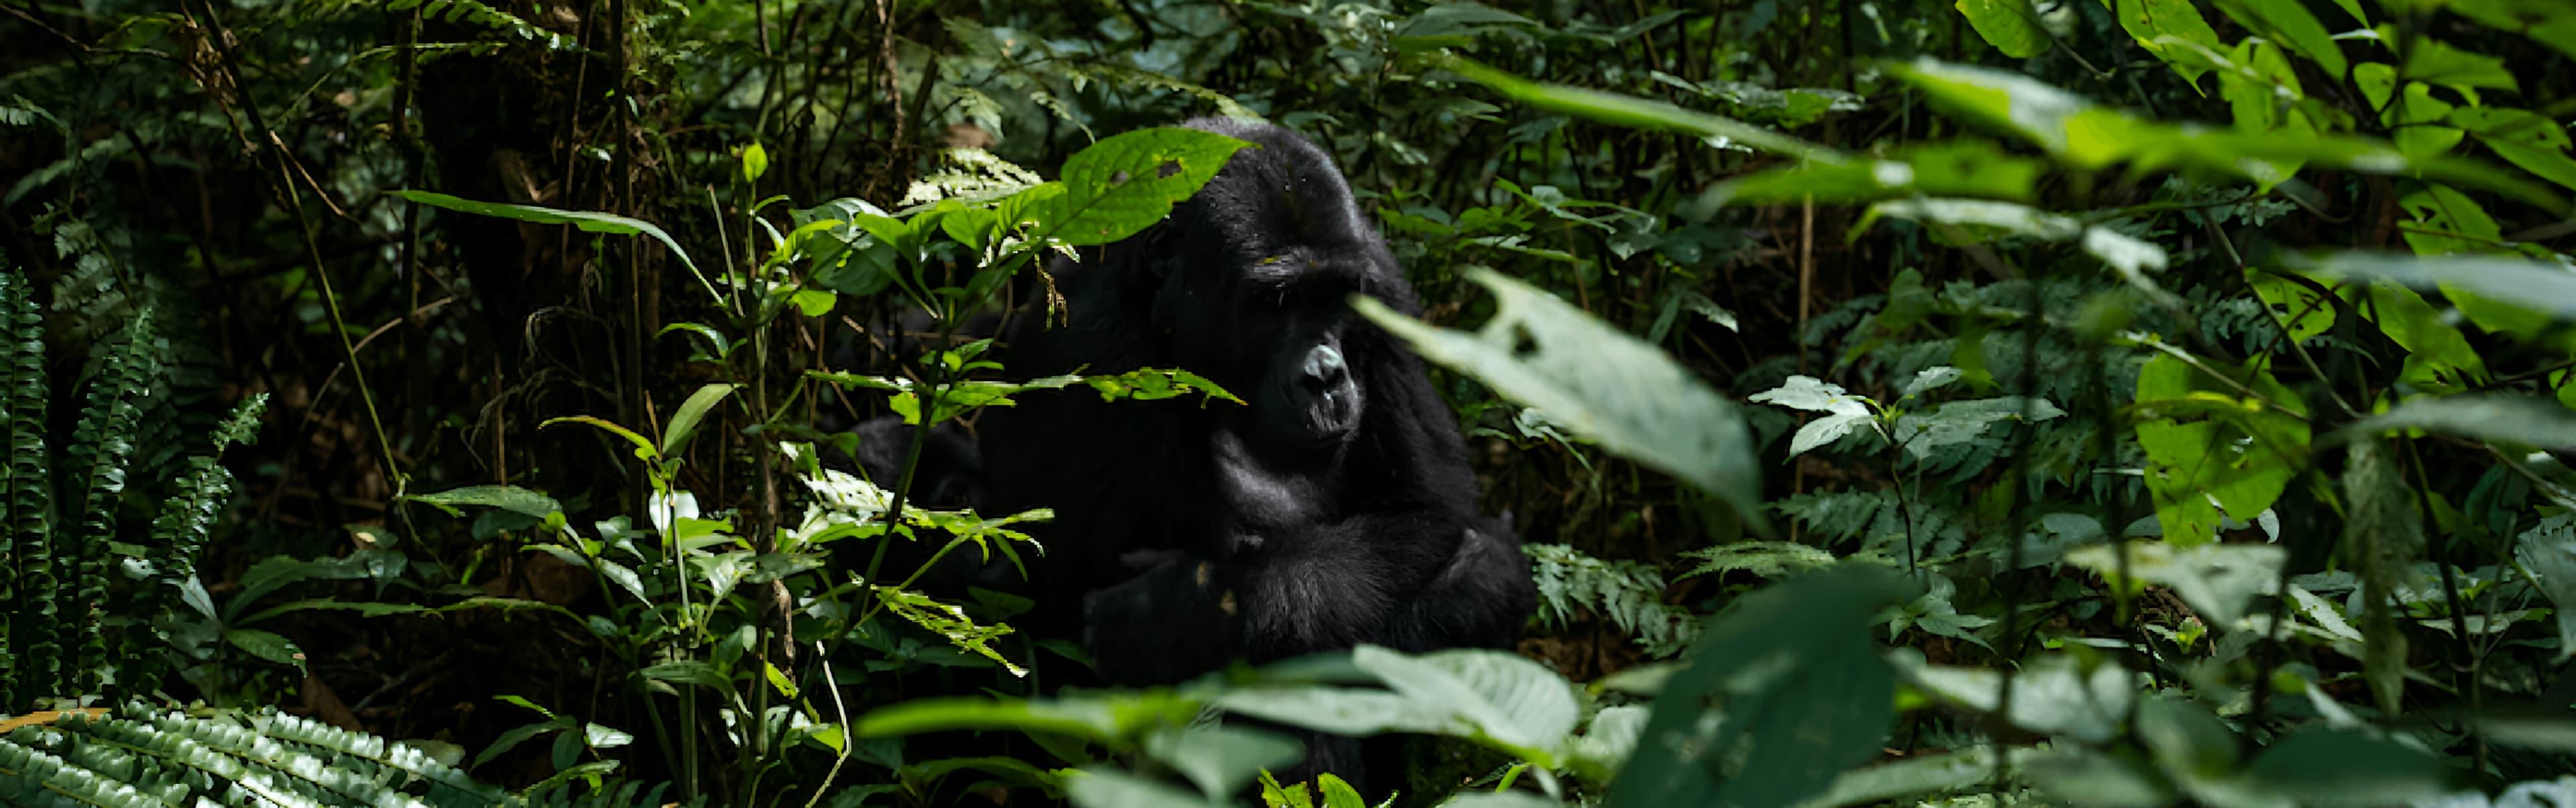 A gorilla sits amidst thick, lush greenery, partially obscured by leaves and plants in a forest environment, just like the intuitive nature within the Koko signs app by ArcTouch.